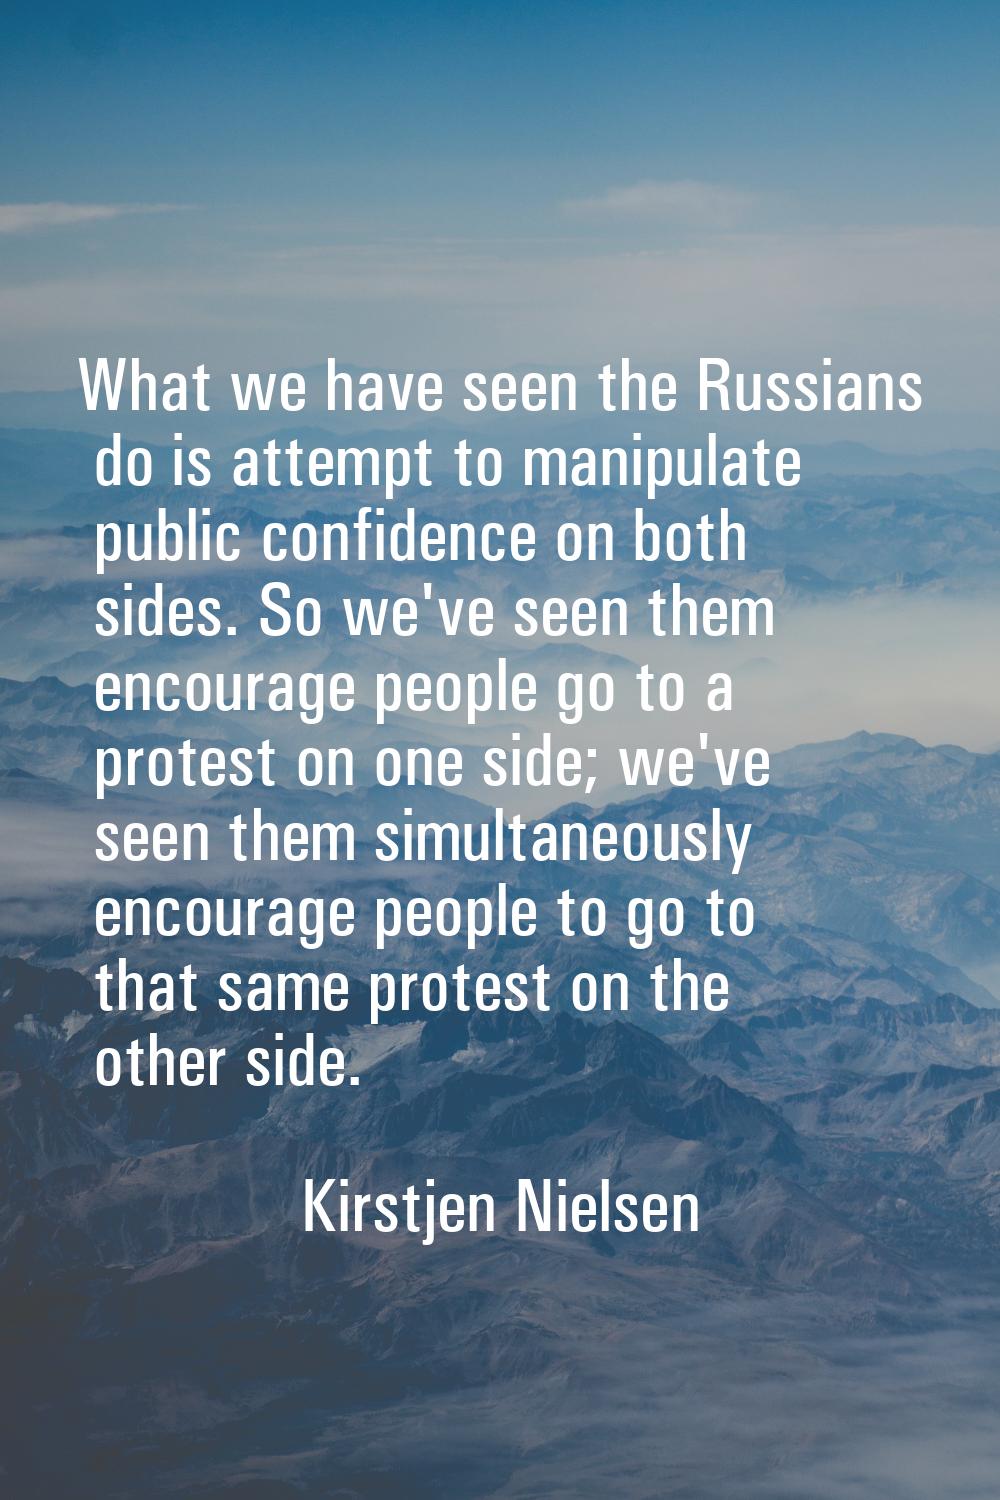 What we have seen the Russians do is attempt to manipulate public confidence on both sides. So we'v